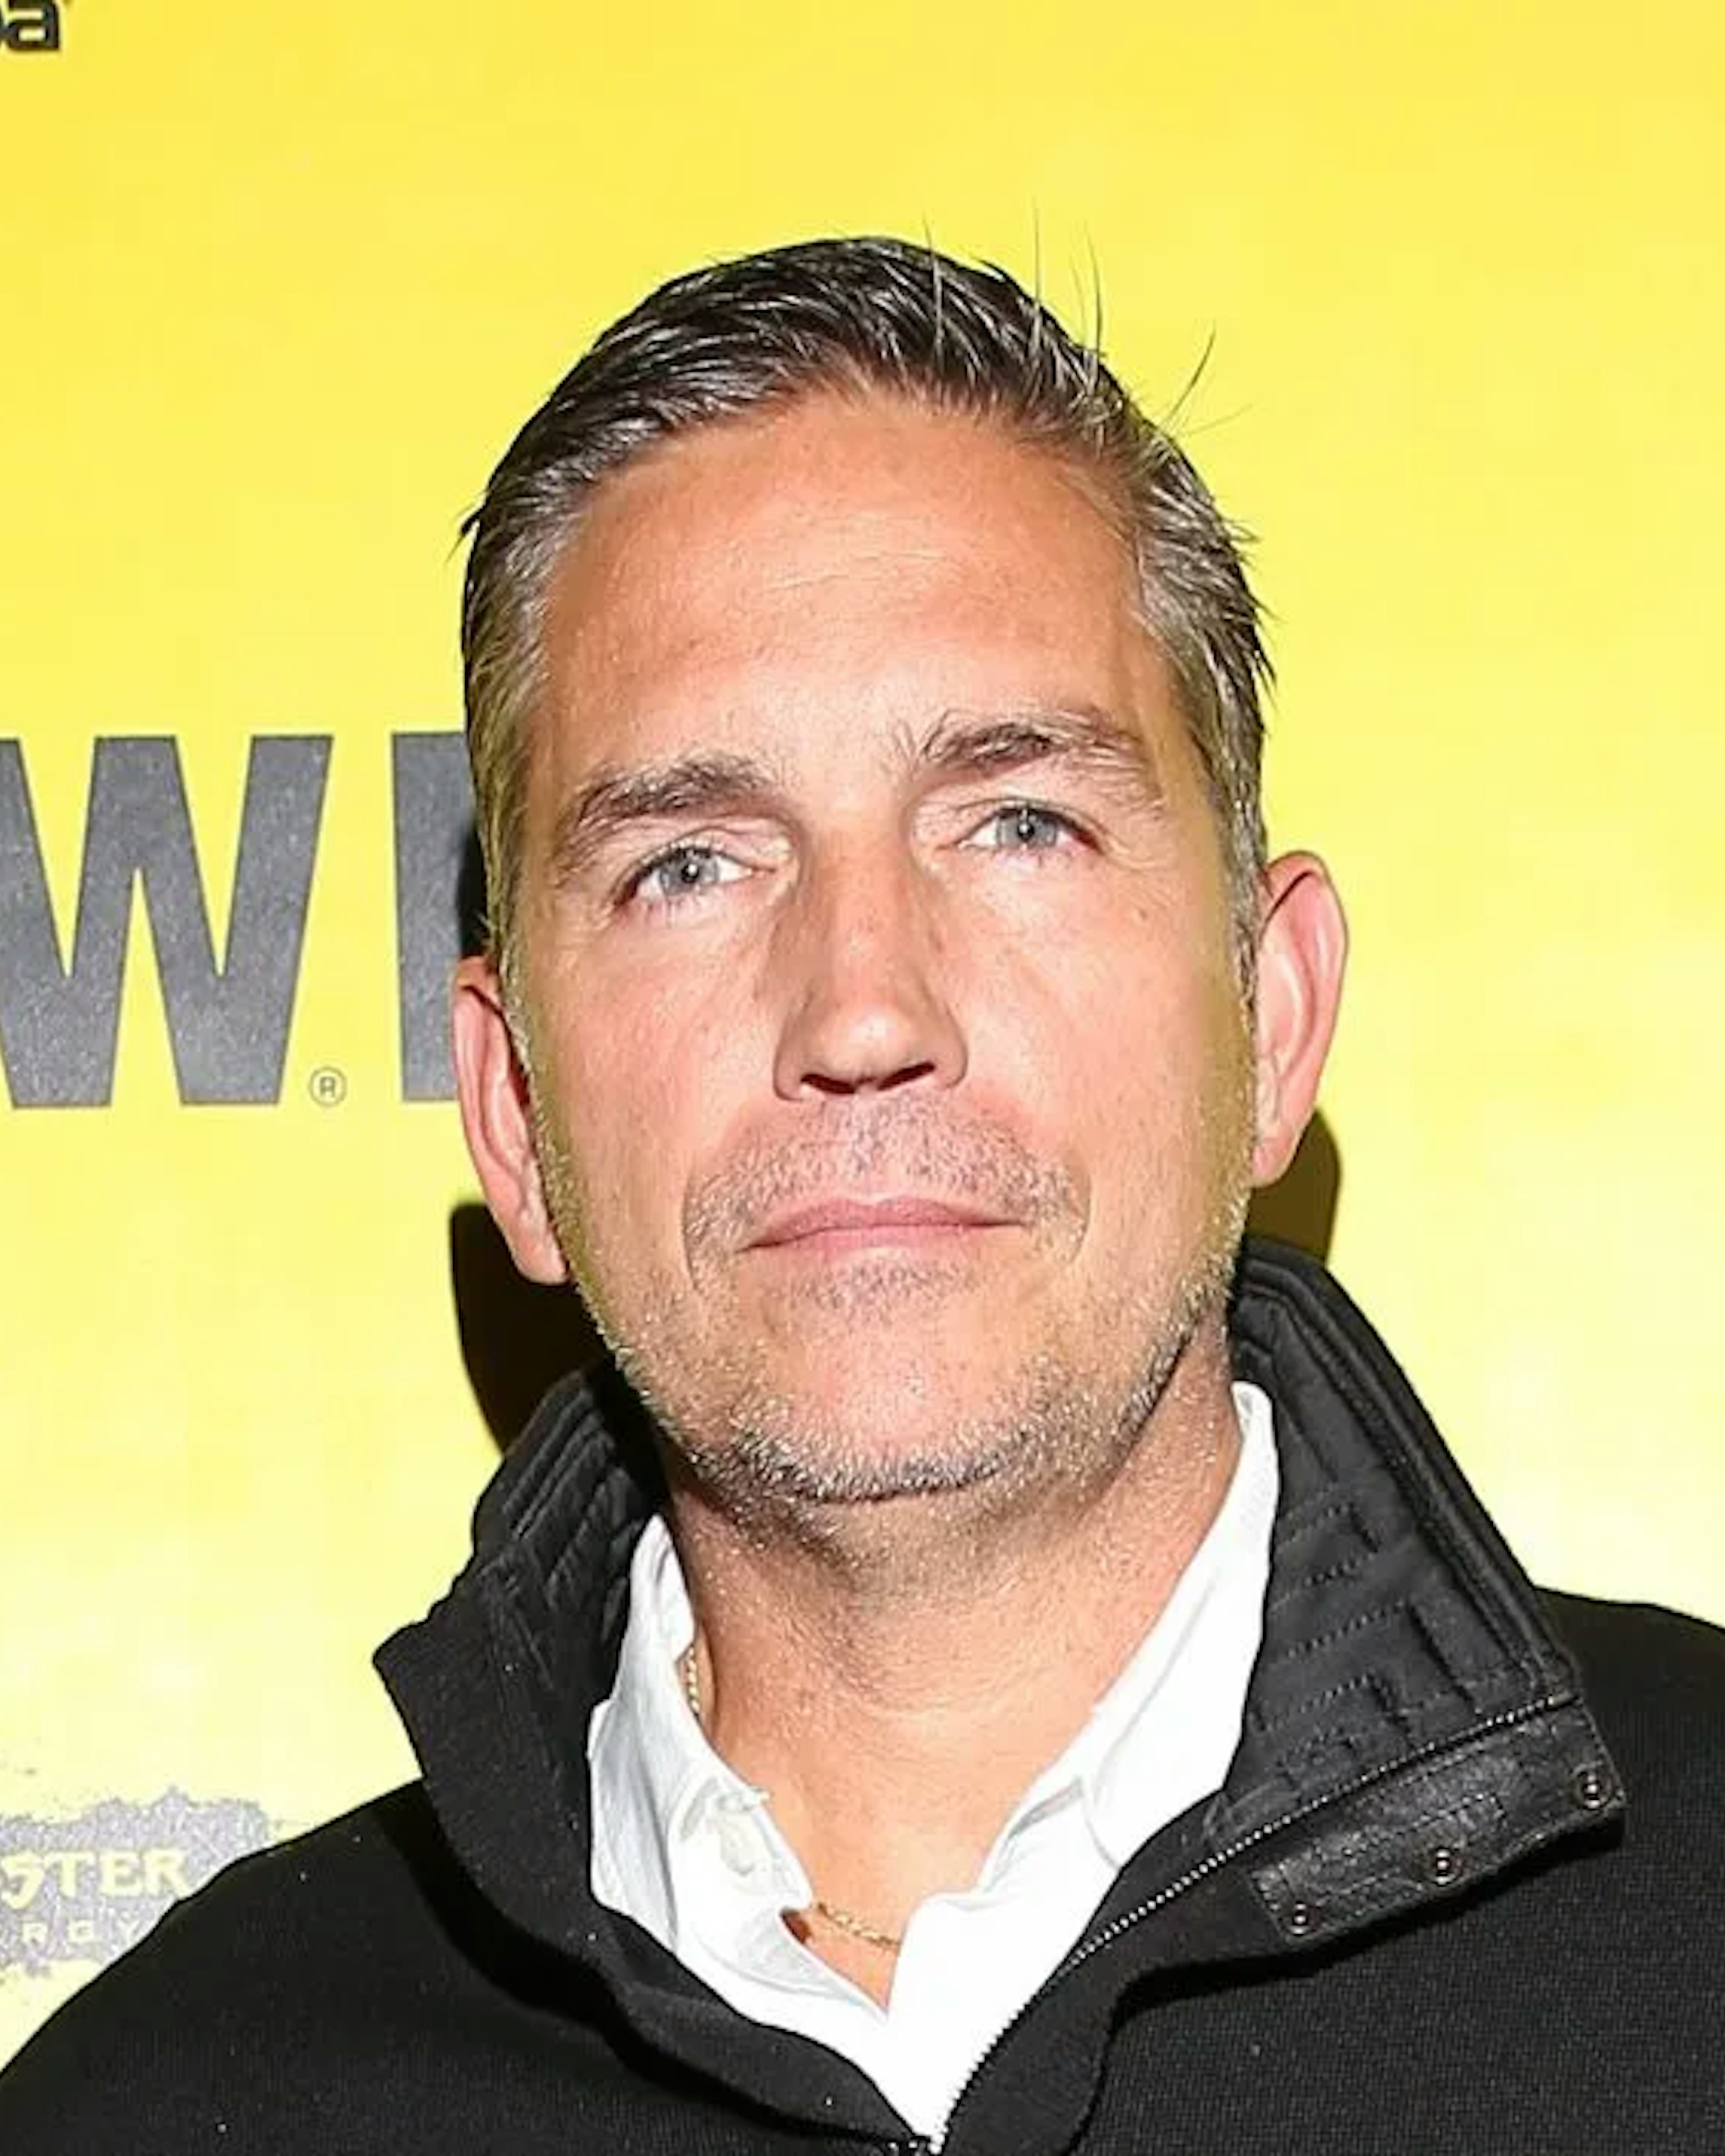 AUSTIN, TX - MARCH 11: Actor Jim Caviezel attends the premiere of "The Ballad of Lefty Brown" during 2017 SXSW Conference and Festivals at Stateside Theater on March 11, 2017 in Austin, Texas. (Photo by Steve Rogers Photography/Getty Images for SXSW)